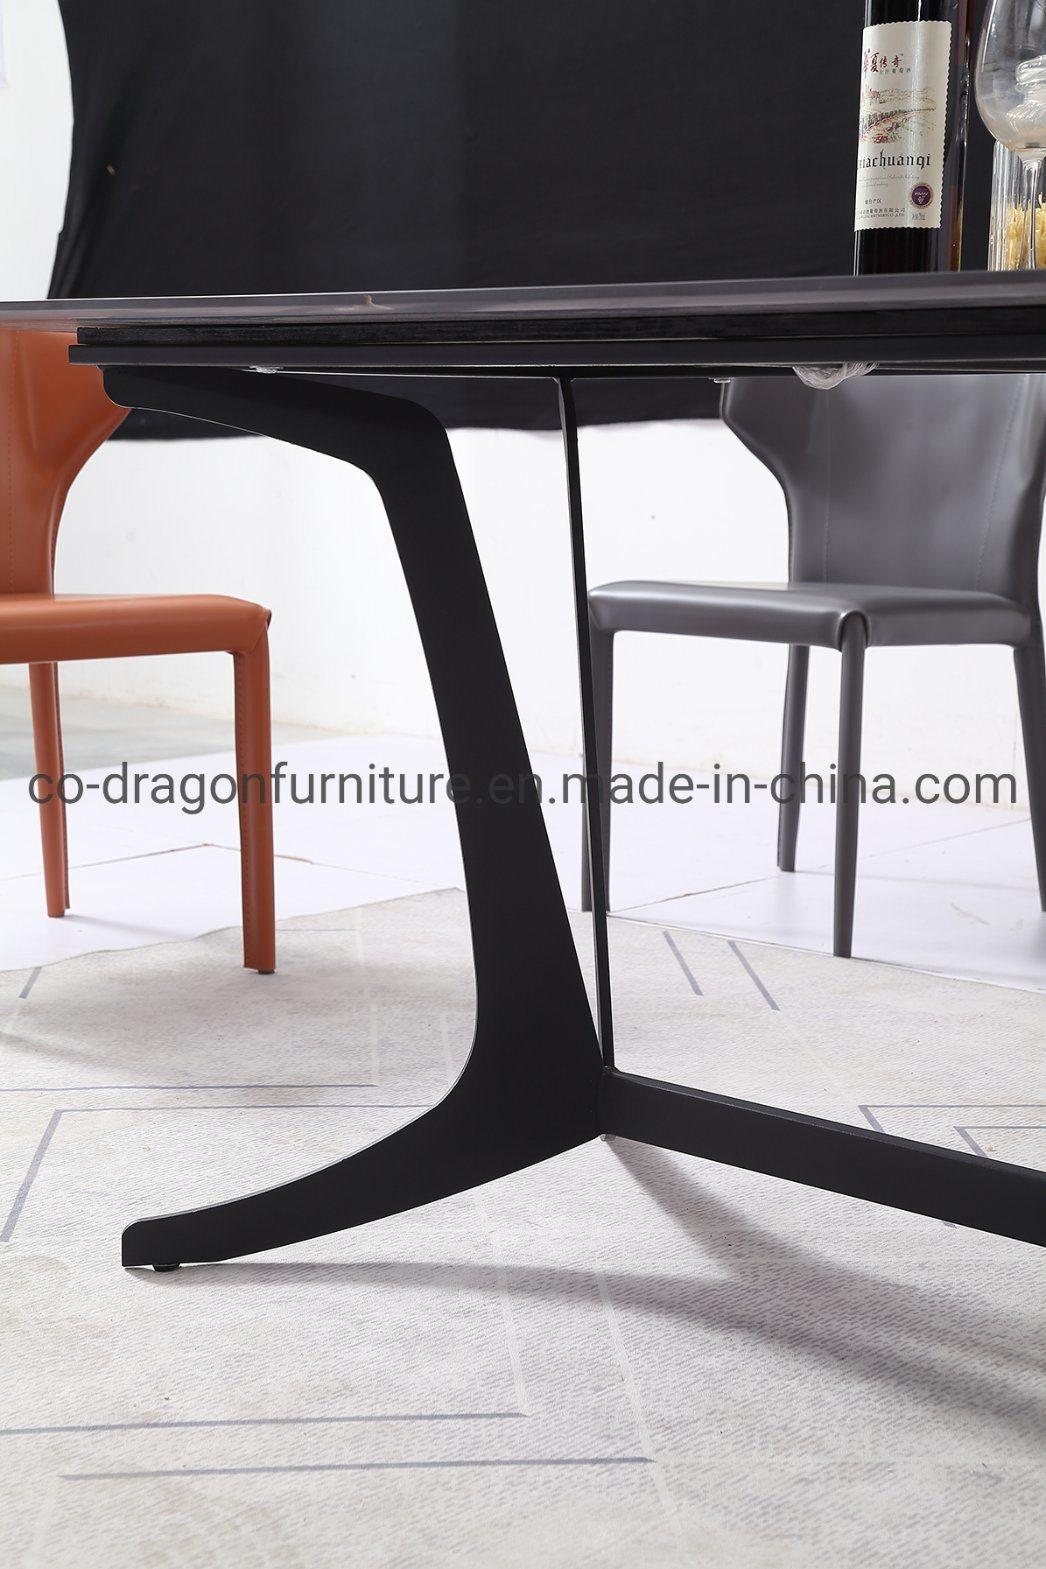 Rock Plate Top Steel Leg Rectangle Dining Table Sets Furniture